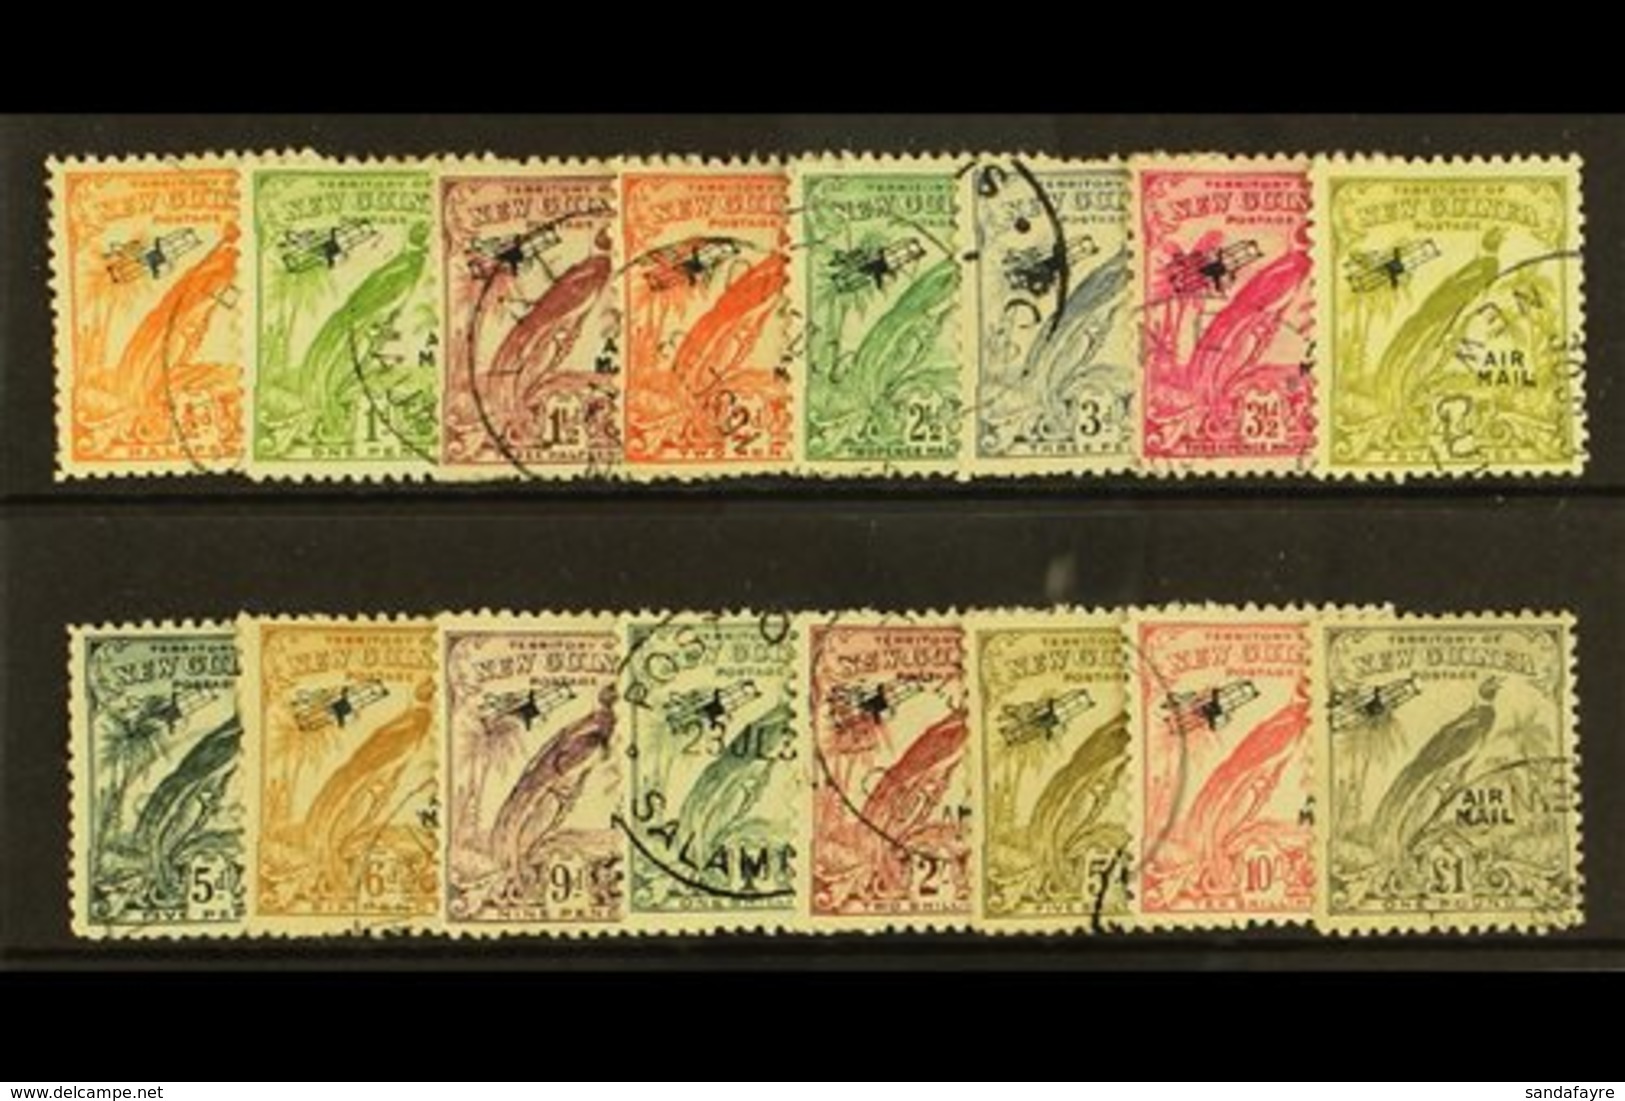 1932 10th Anniv Set (without Dates),  Overprinted Air Mail, SG 190/203, Very Fine And Fresh Used. (15 Stamps) For More I - Papoea-Nieuw-Guinea